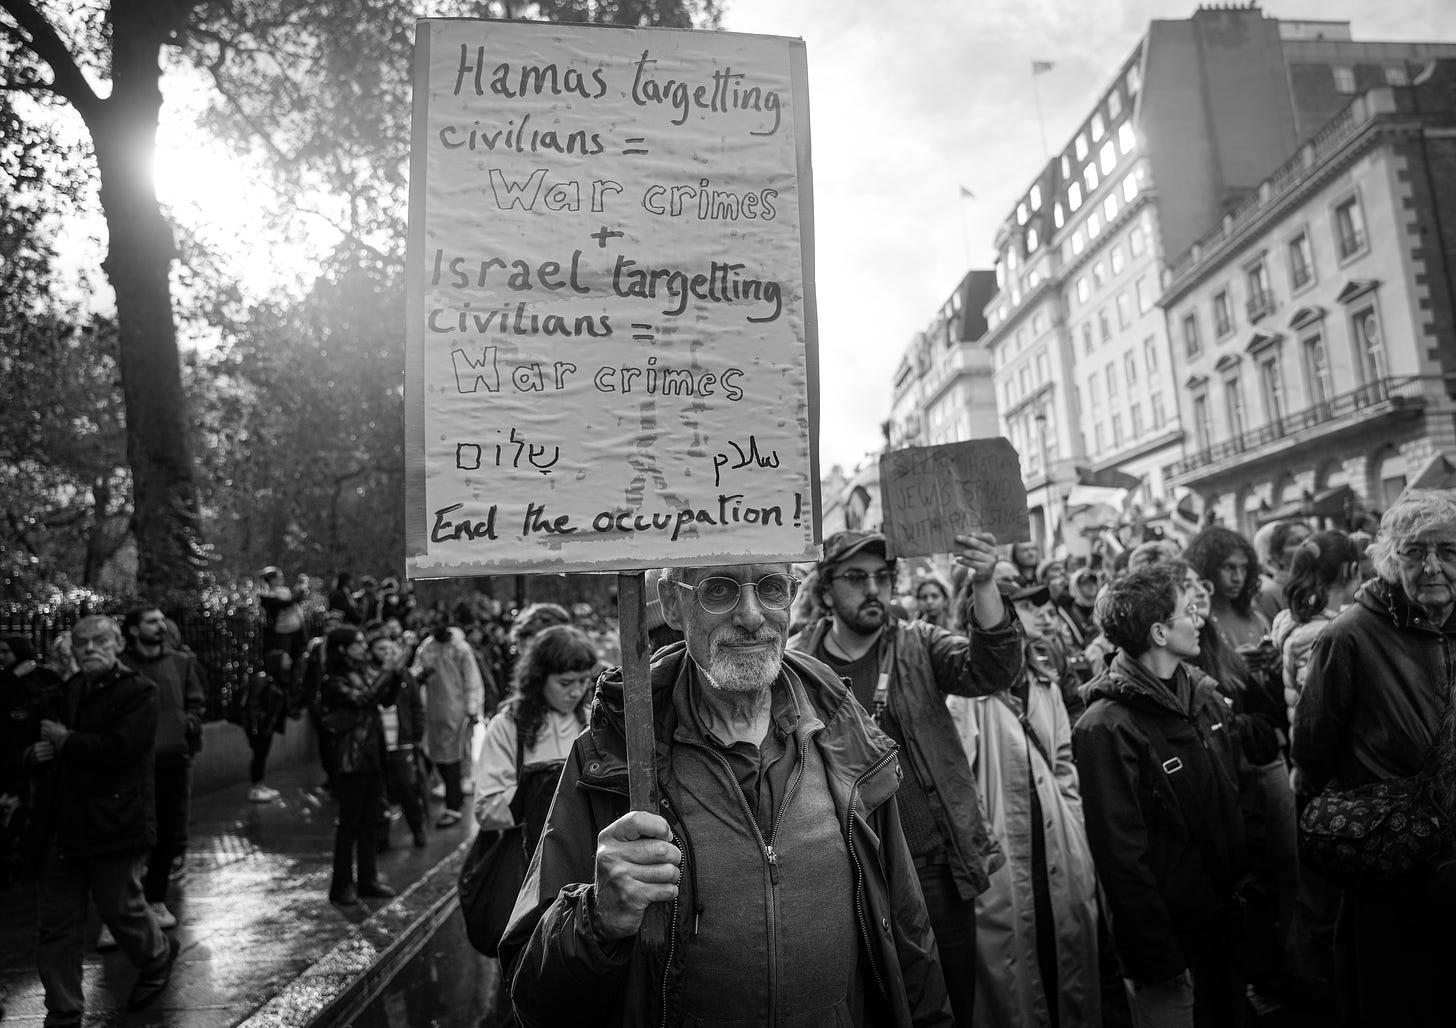 A man with a sign condemning both Israel and Hamas in the current conflict. CC-BY licensed photo by Alisdare Hickson on Flickr: https://www.flickr.com/photos/59952459@N08/53289187680